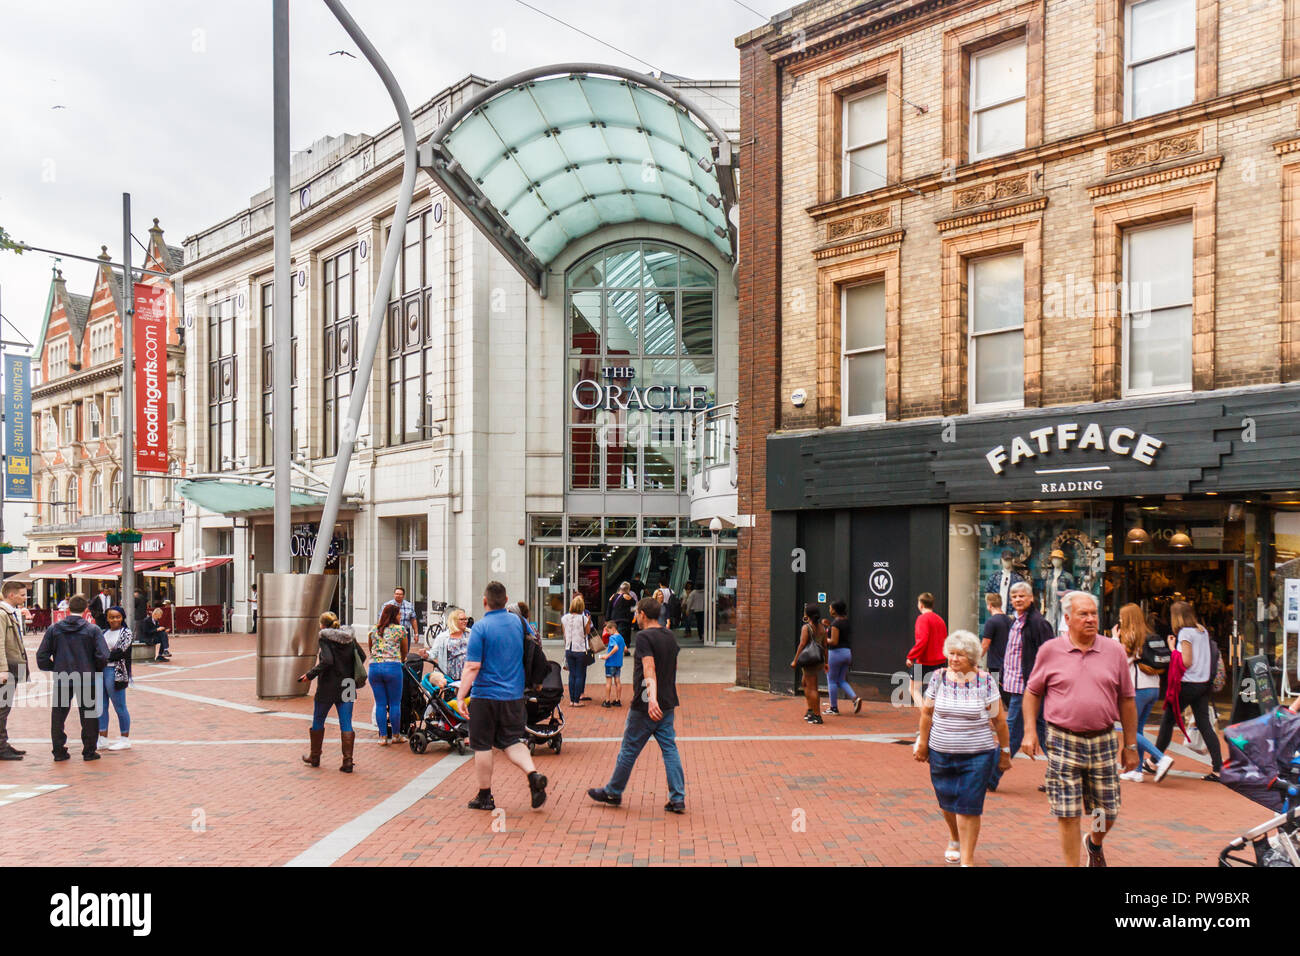 Reading, England - 1st June 2018: People walking past the entrance to the Oracle shopping centre. The mall attracts shoppers from all over the region. Stock Photo